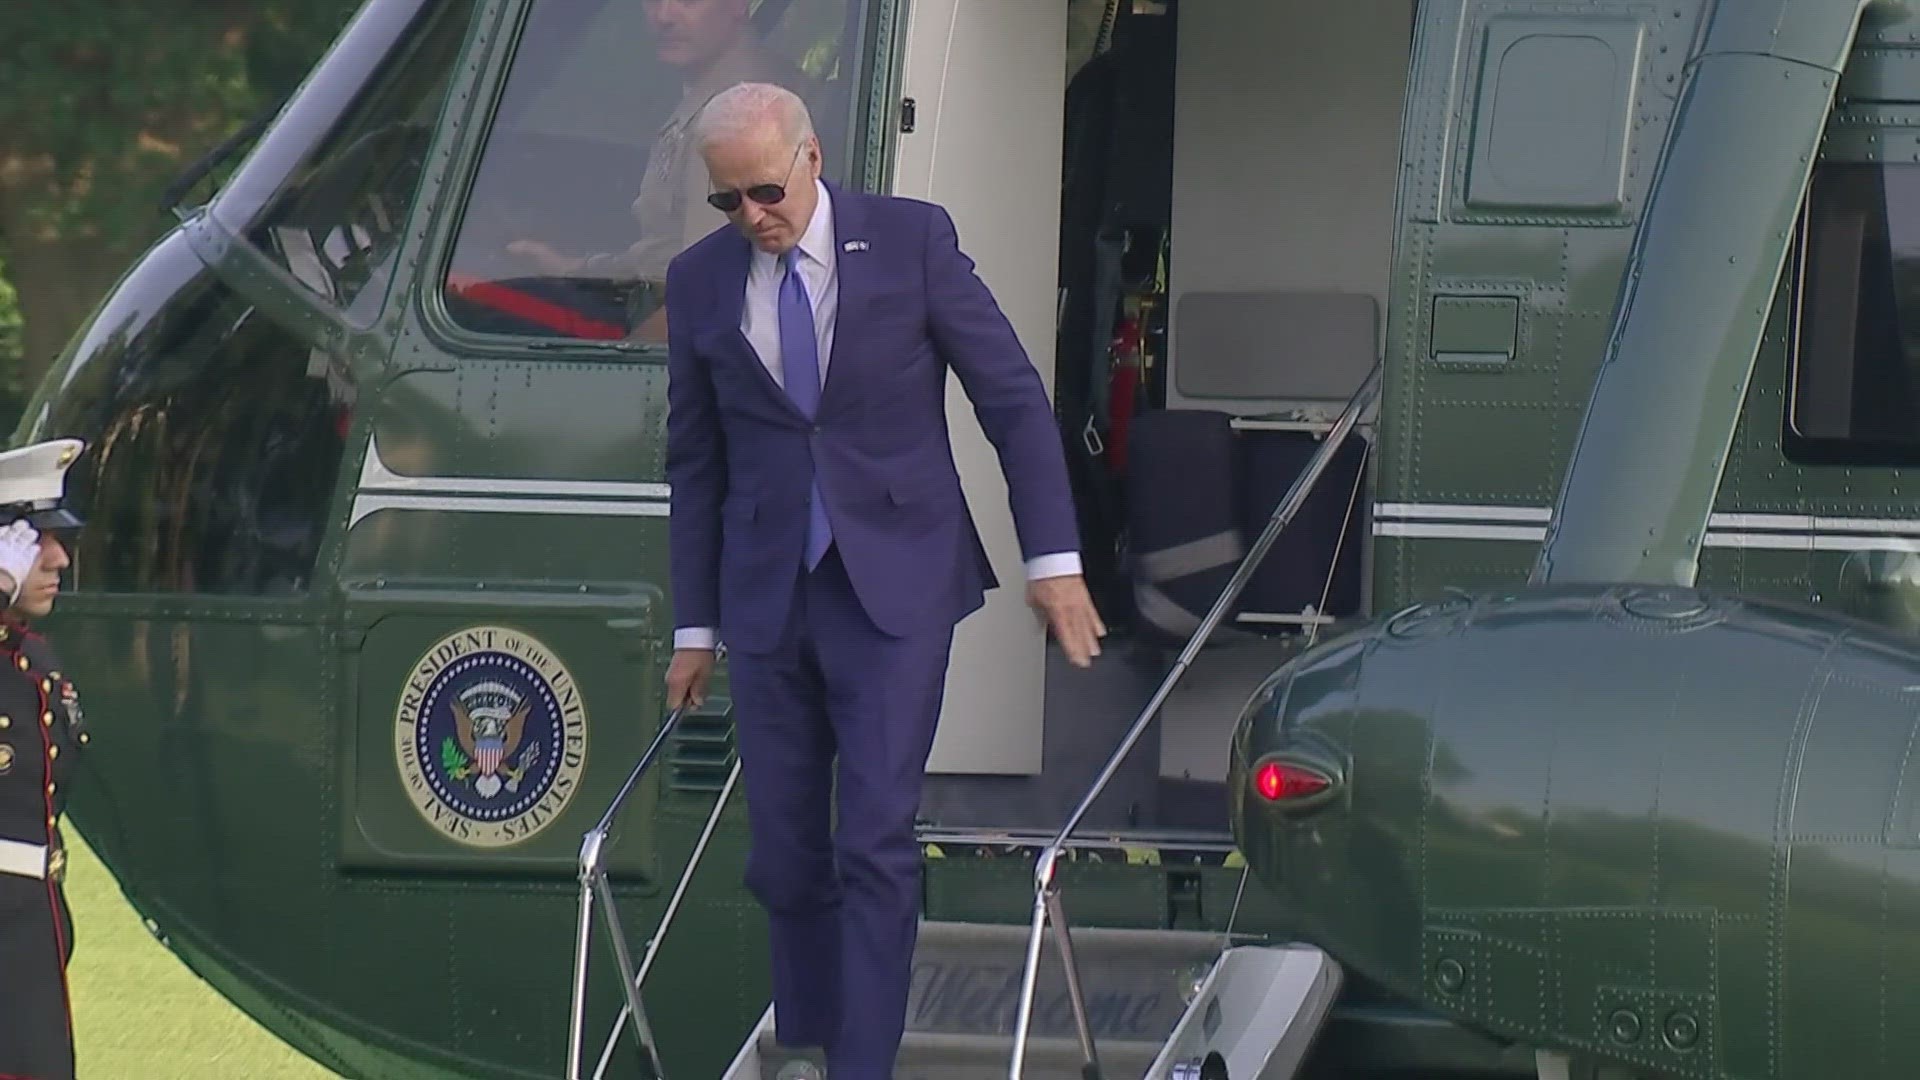 President Biden will address the nation later today.